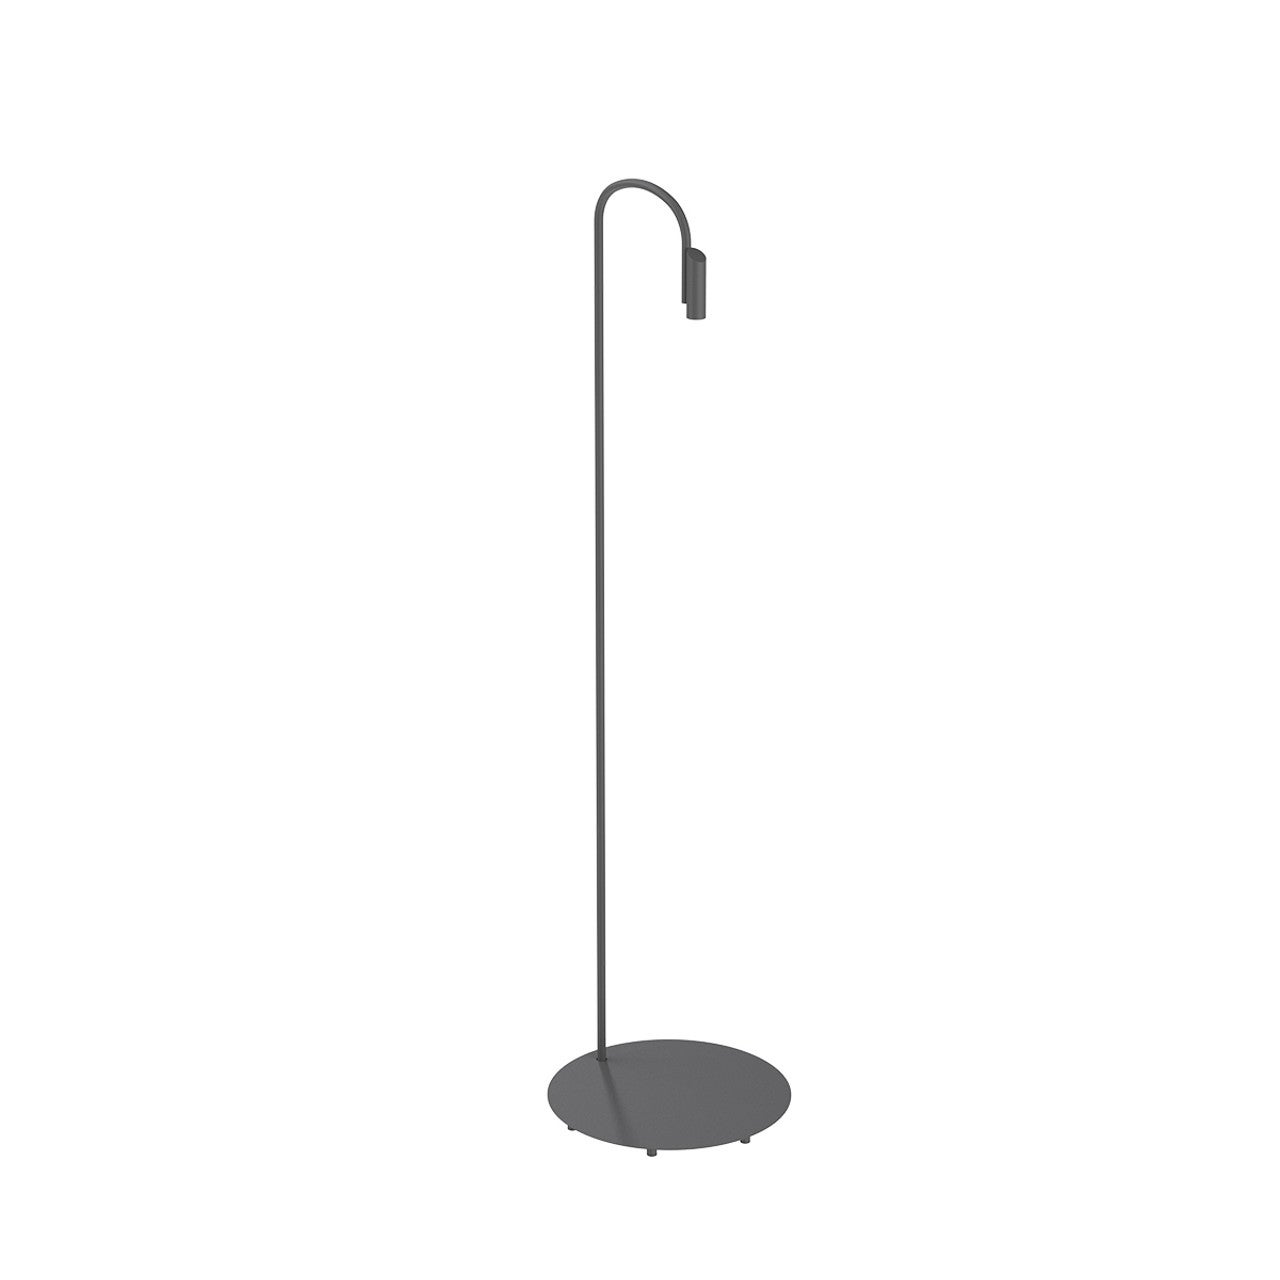 Flos Caule 3000K Model 4 Outdoor Floor Lamp in Anthracite with Regular Shade For Sale